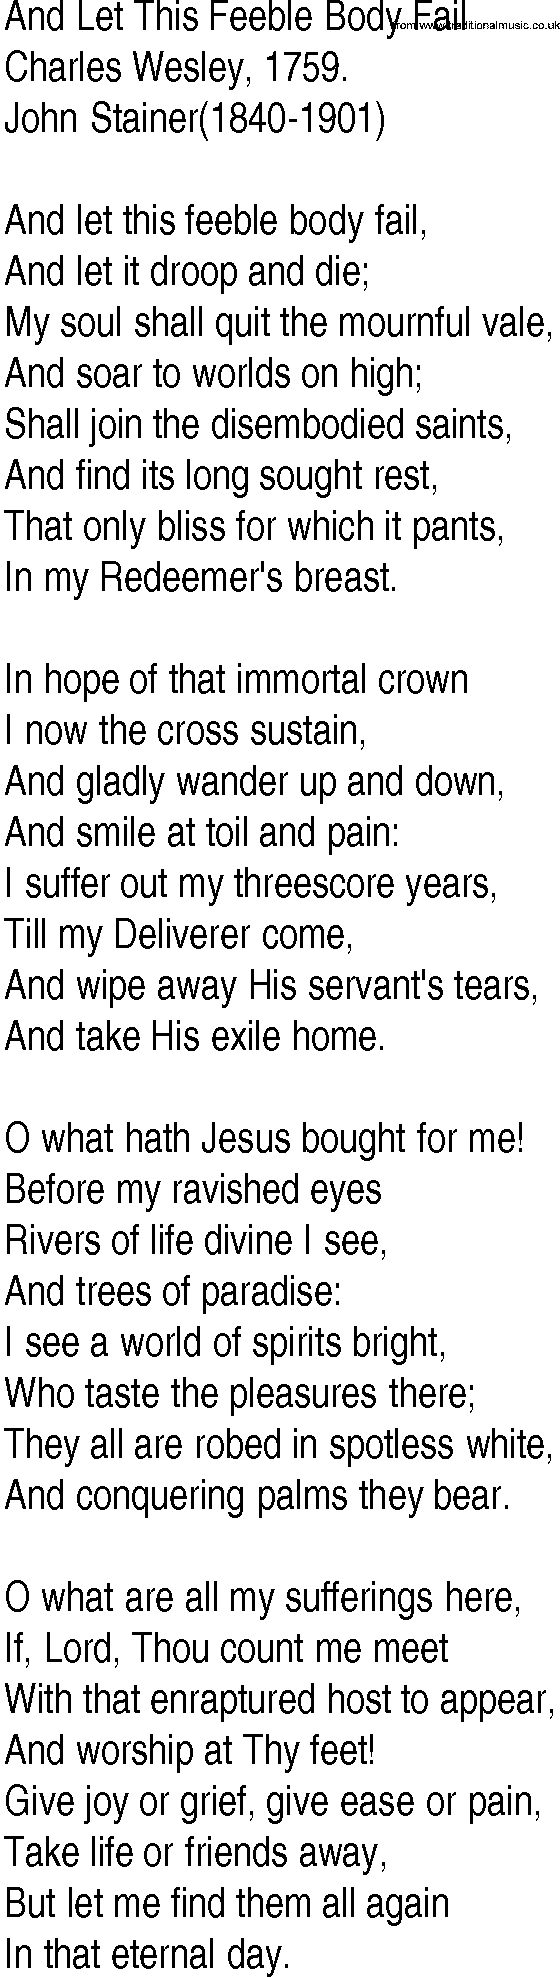 Hymn and Gospel Song: And Let This Feeble Body Fail by Charles Wesley lyrics